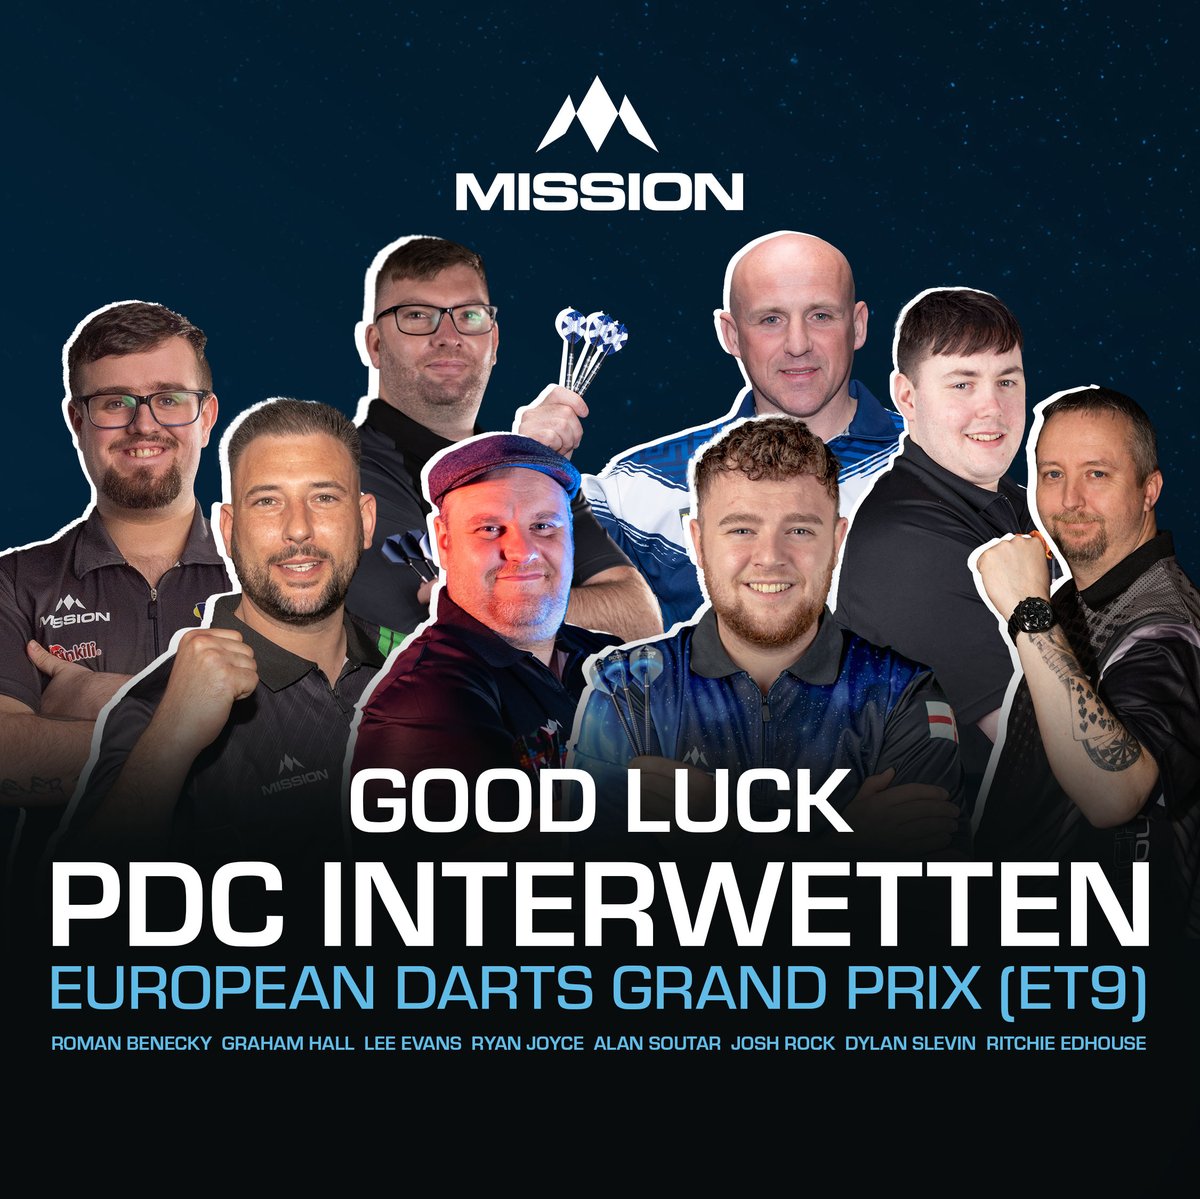 It's Interwetten European Darts Grand Prix (ET9) this weekend & we can't wait to see #TeamMission in action! All the best to @soots180, @joshrock18002, @RitchieEdhouse, @rjoyce180, @dylanslevin180, @RBenecky, Lee Evans & Graham Hall at Glaspalast Sindelfingen, Germany! #ForTheWin